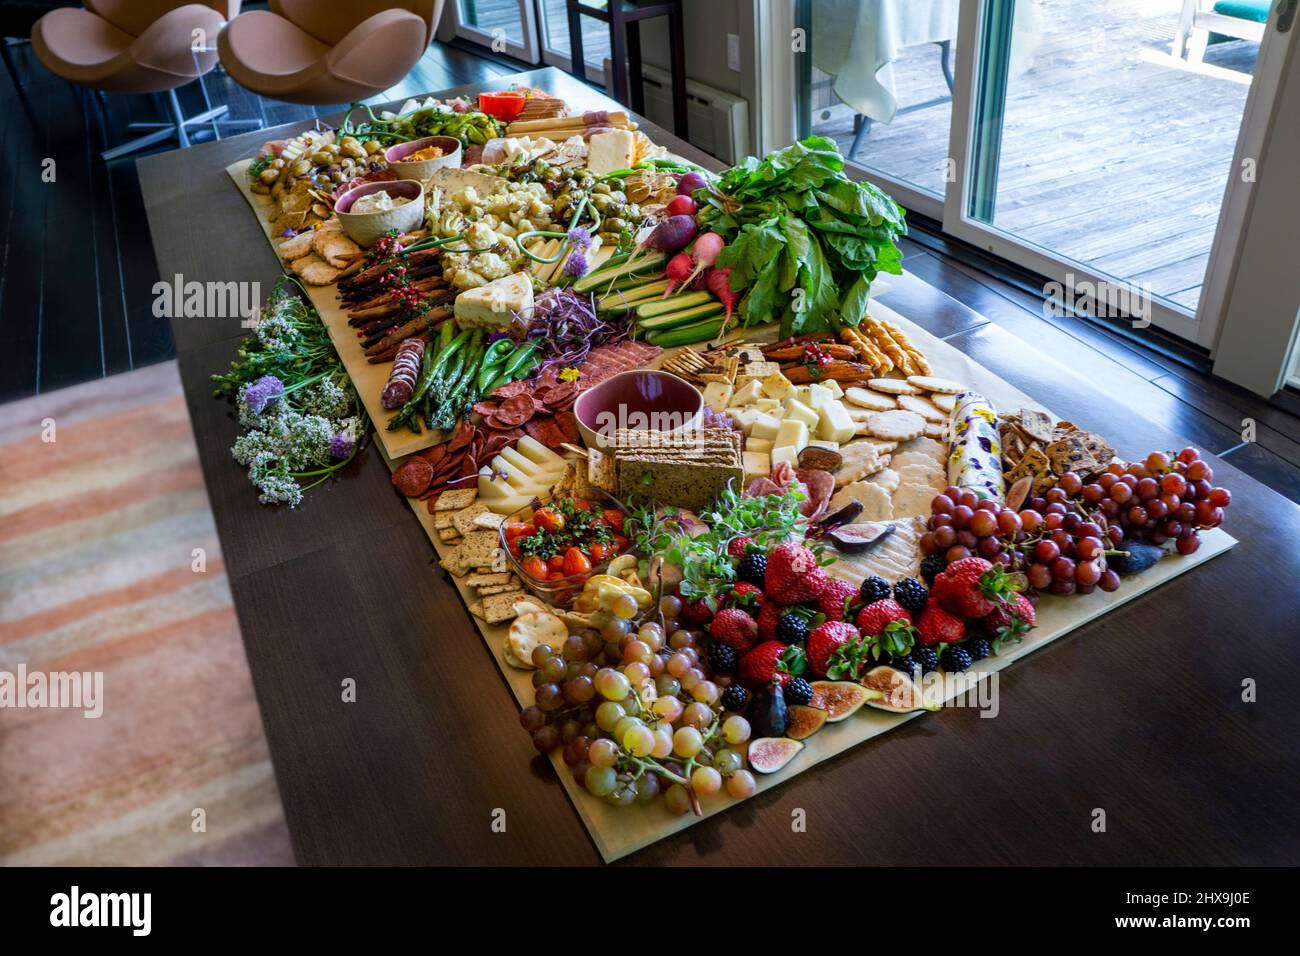 Grazing Board with various Charcuterie, Fruits, Vegetables and Cheese Stock Photo